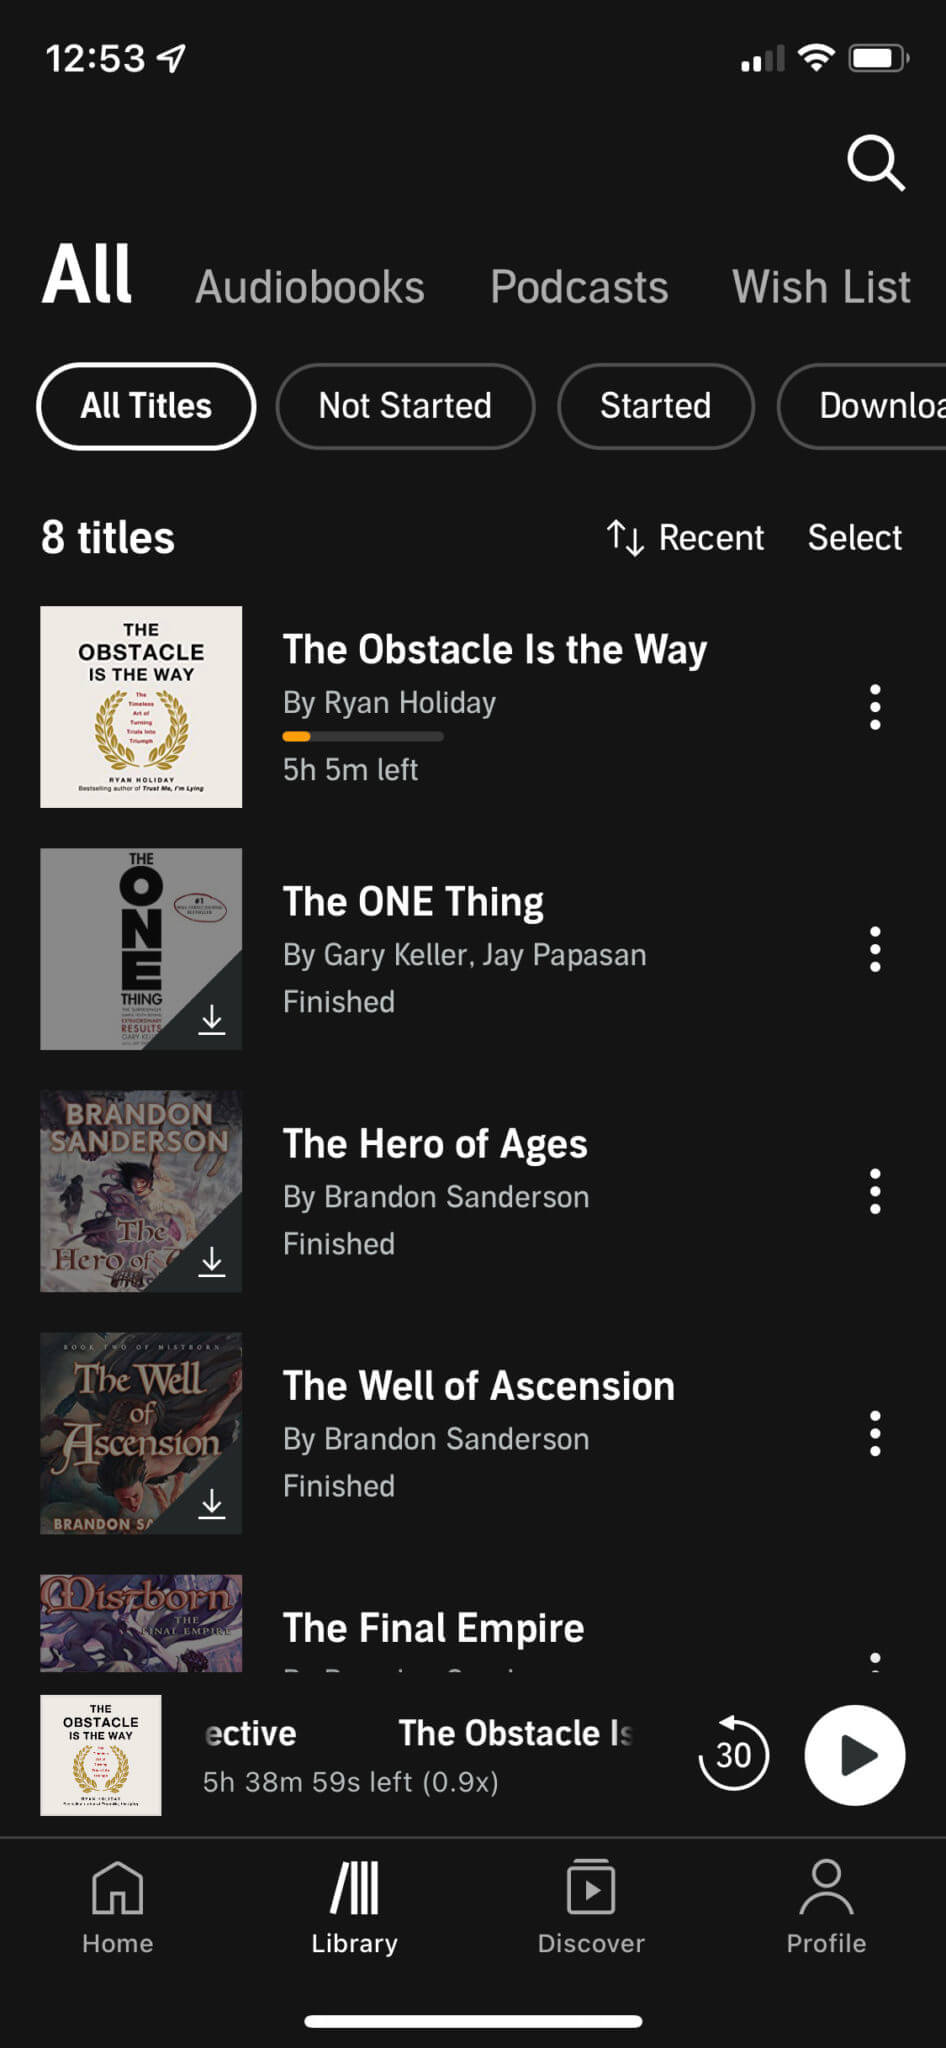 Audible Library